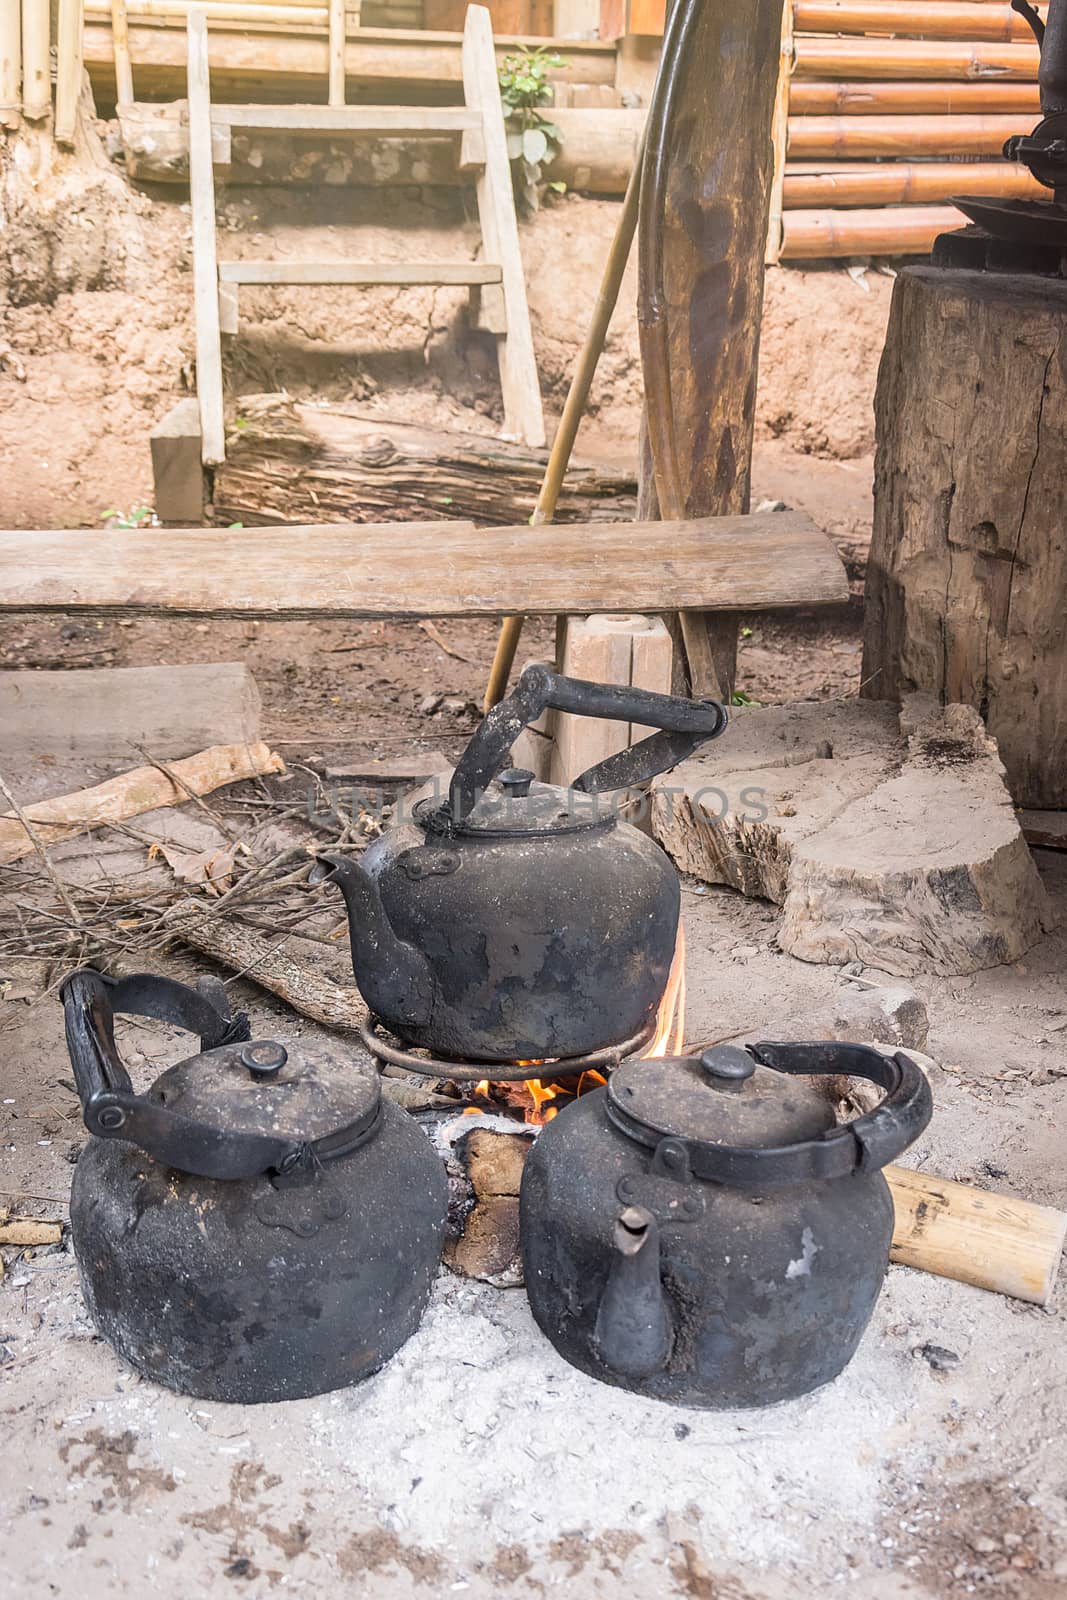 kettle boiling on stove in the kitchen tribal rural north of Tha by rakoptonLPN